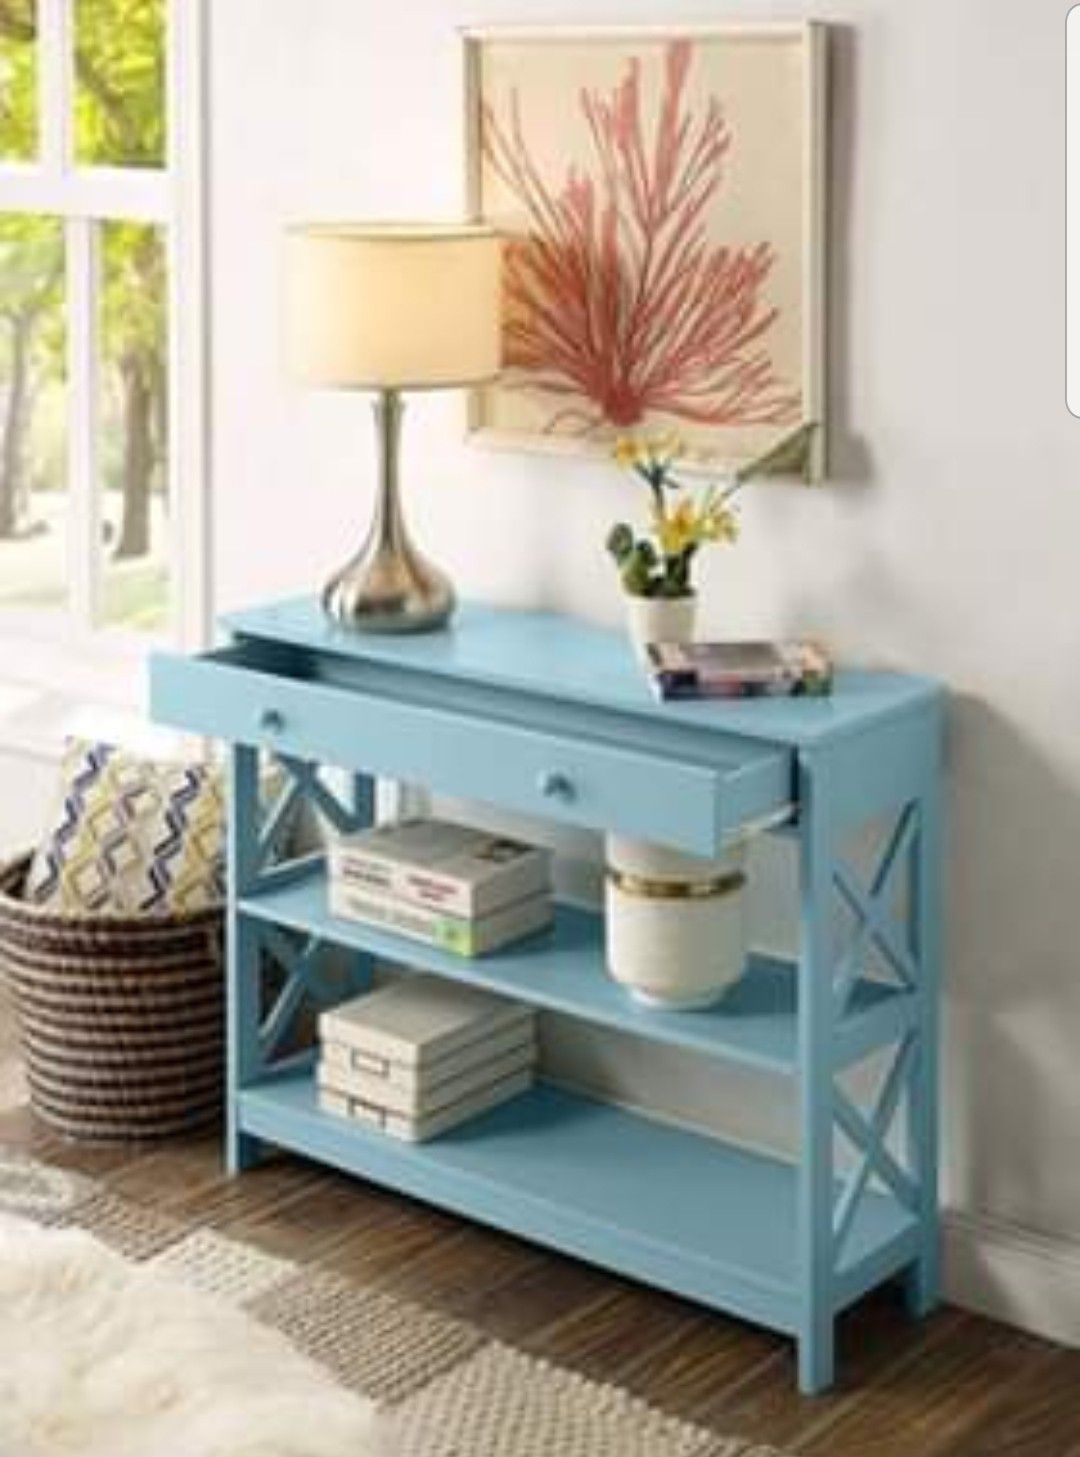 Console Table Living Dining Room Bedroom Entryway Hallway Side with Storage Drawer and Shelves New in Box